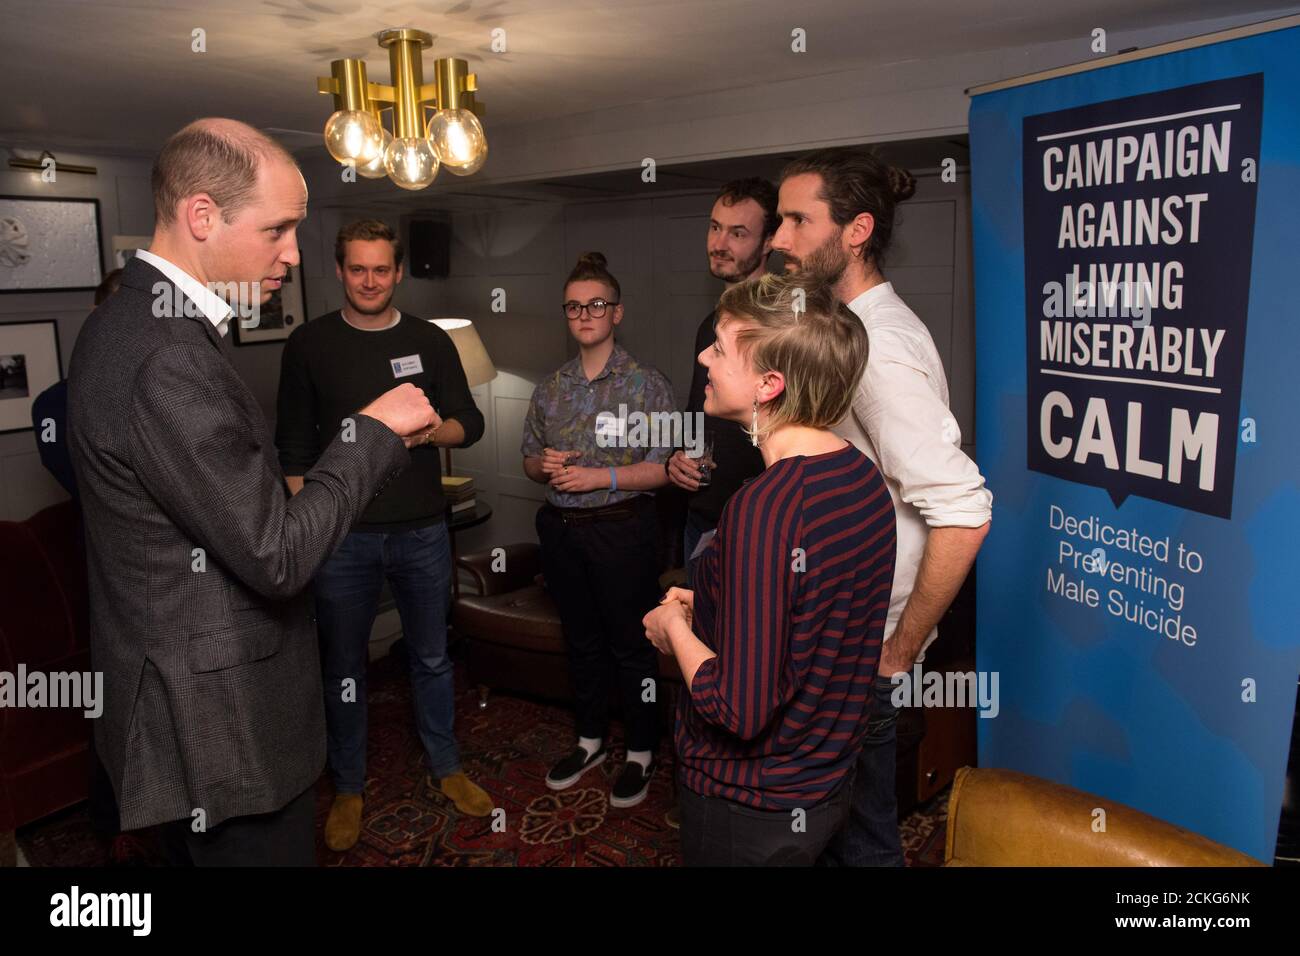 The Duke of Cambridge (L) meets volunteers of 'Campaign Against Living Miserably' (CALM), a charity dedicated to preventing male suicide, to lend his support to their 'Best Man Project' at High Road House, London, Britain January 10, 2018. REUTERS/Dominic Lipinski/Pool Stock Photo